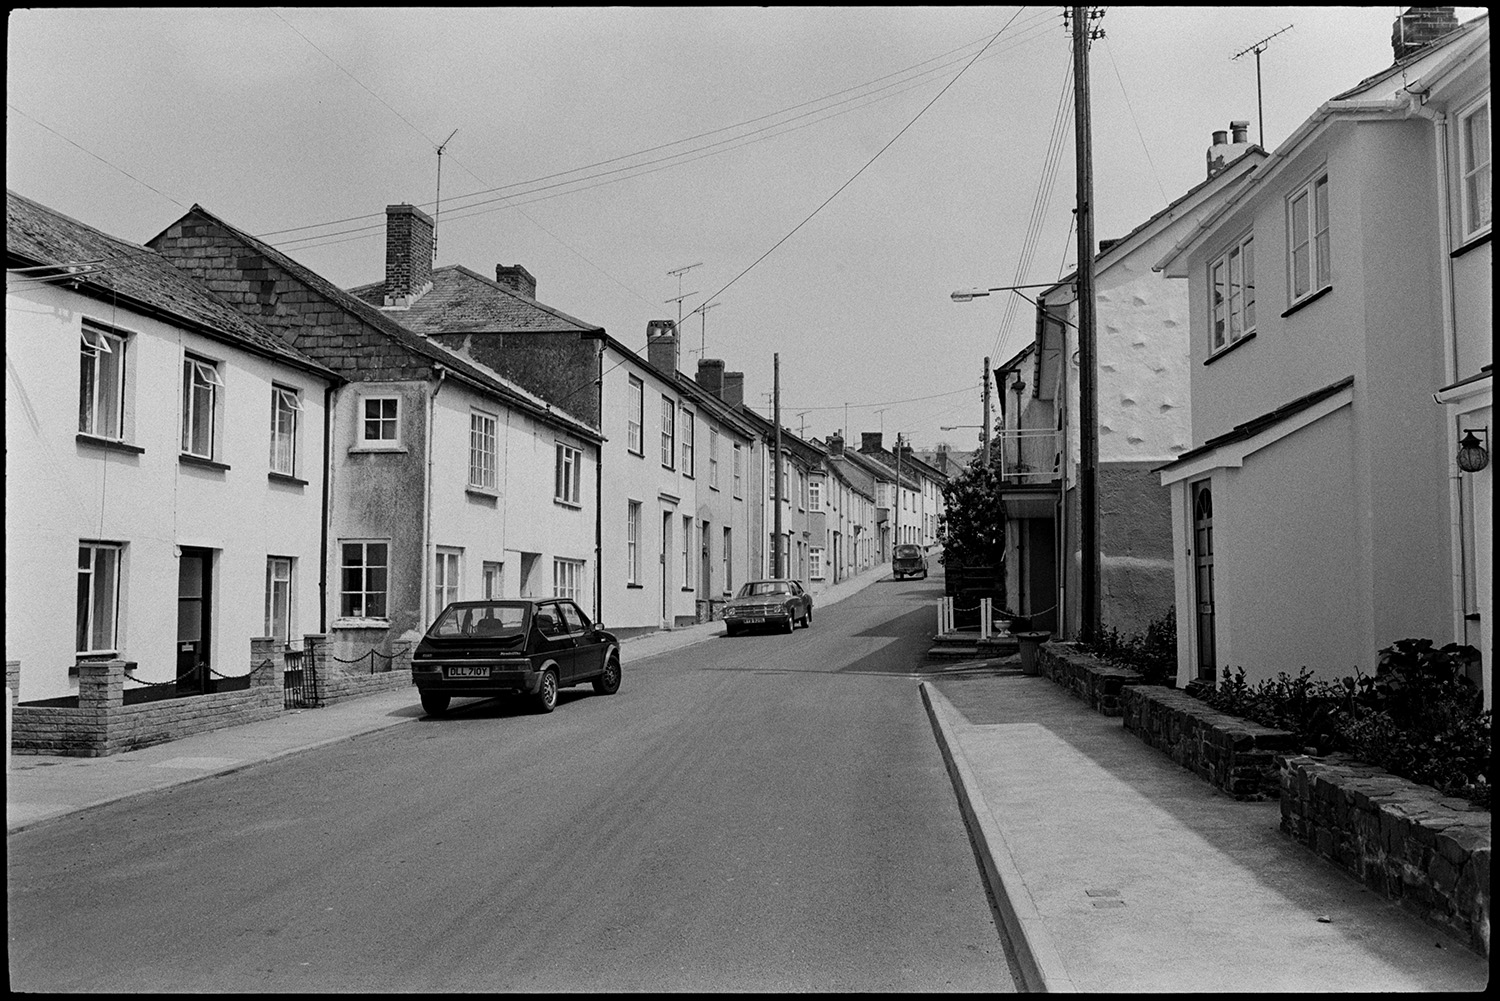 Comparison with old photo. Street scenes, man mowing lawn. Lorries and cars.
[A street at North Tawton with cottages, houses and parked cars.]